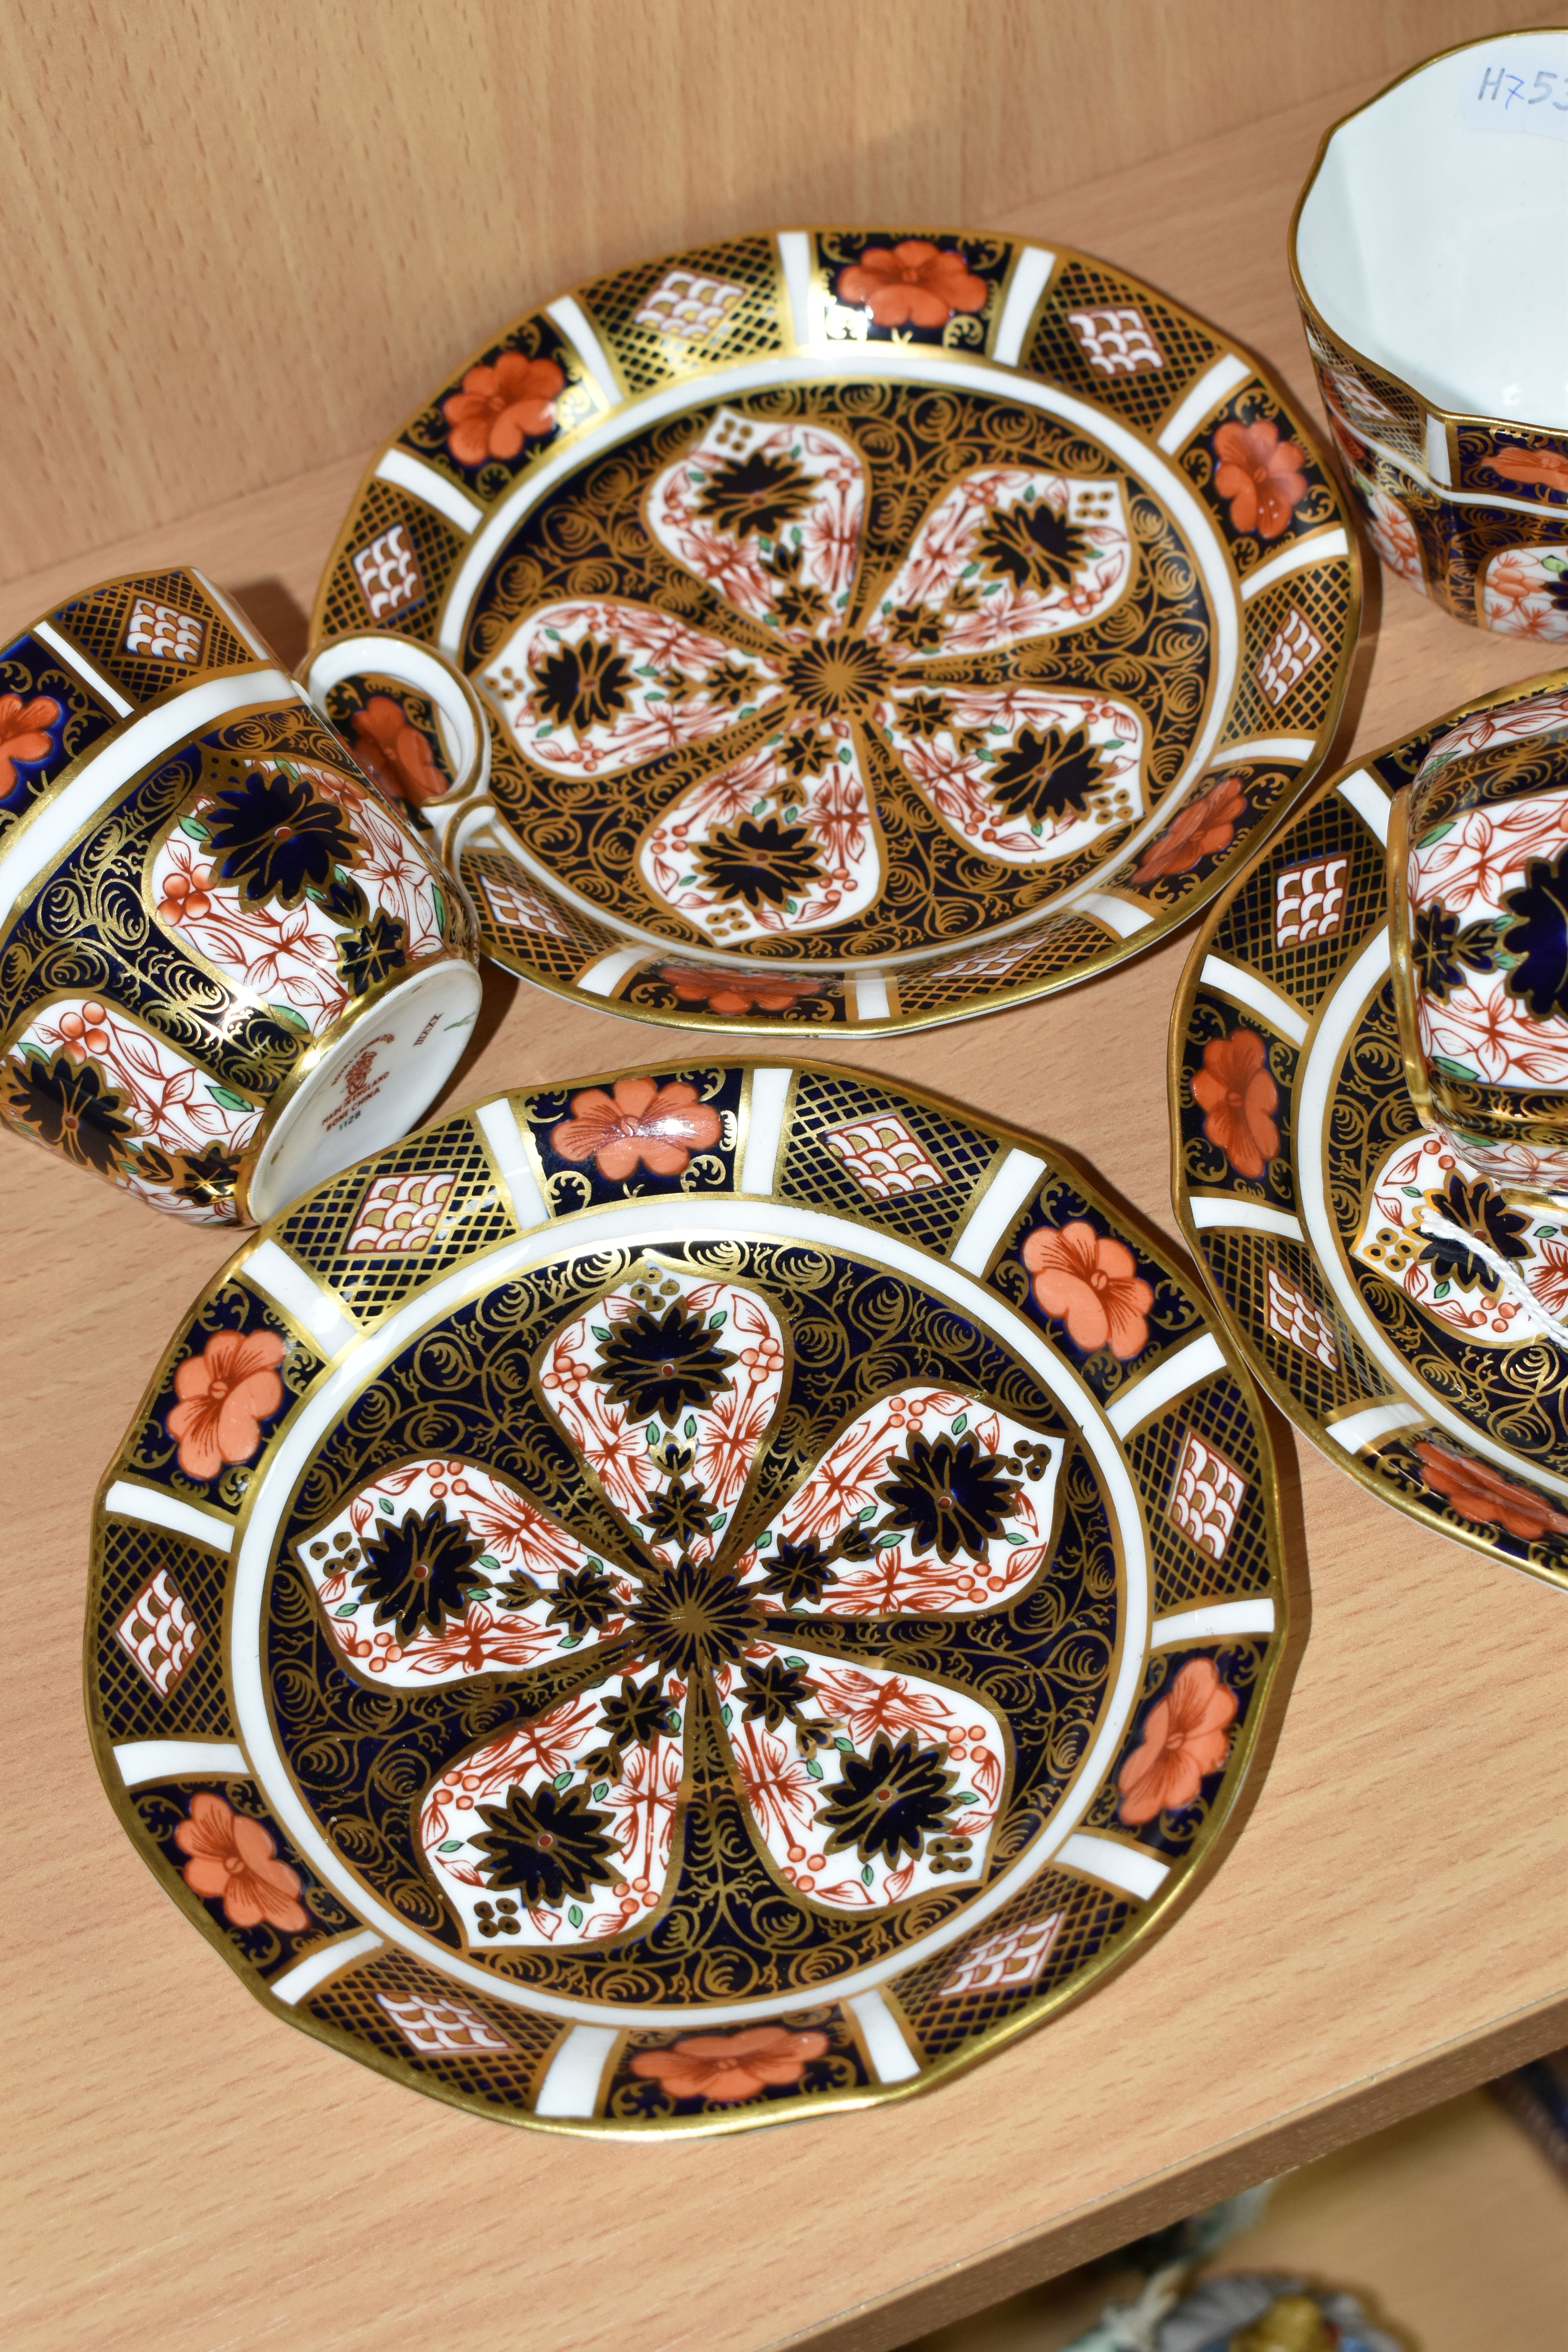 THREE ROYAL CROWN DERBY IMARI 1128 TEACUPS AND SAUCERS, having red printed backstamps, most pieces - Image 4 of 4